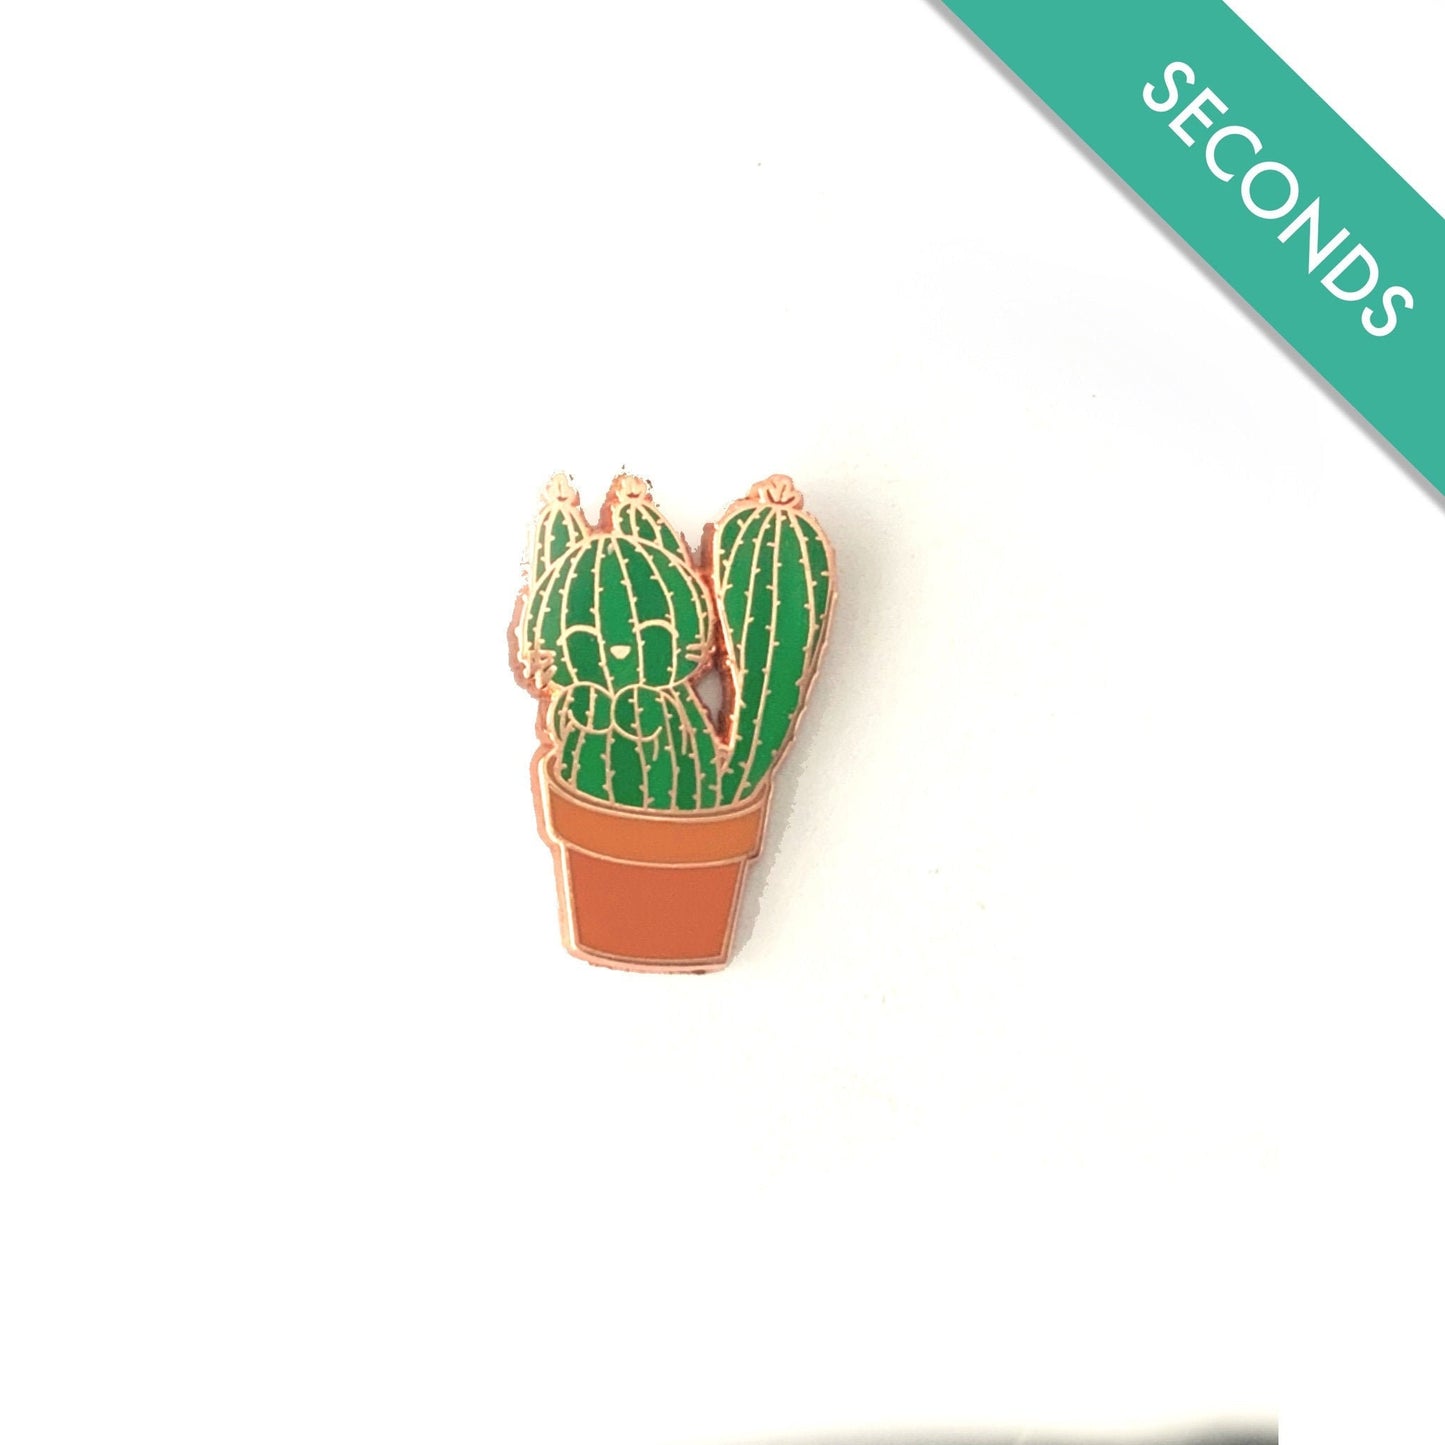 Cactus Cat - Pin Seconds - Small Enamel Pins, Momma and Baby Cactus Cat Pins